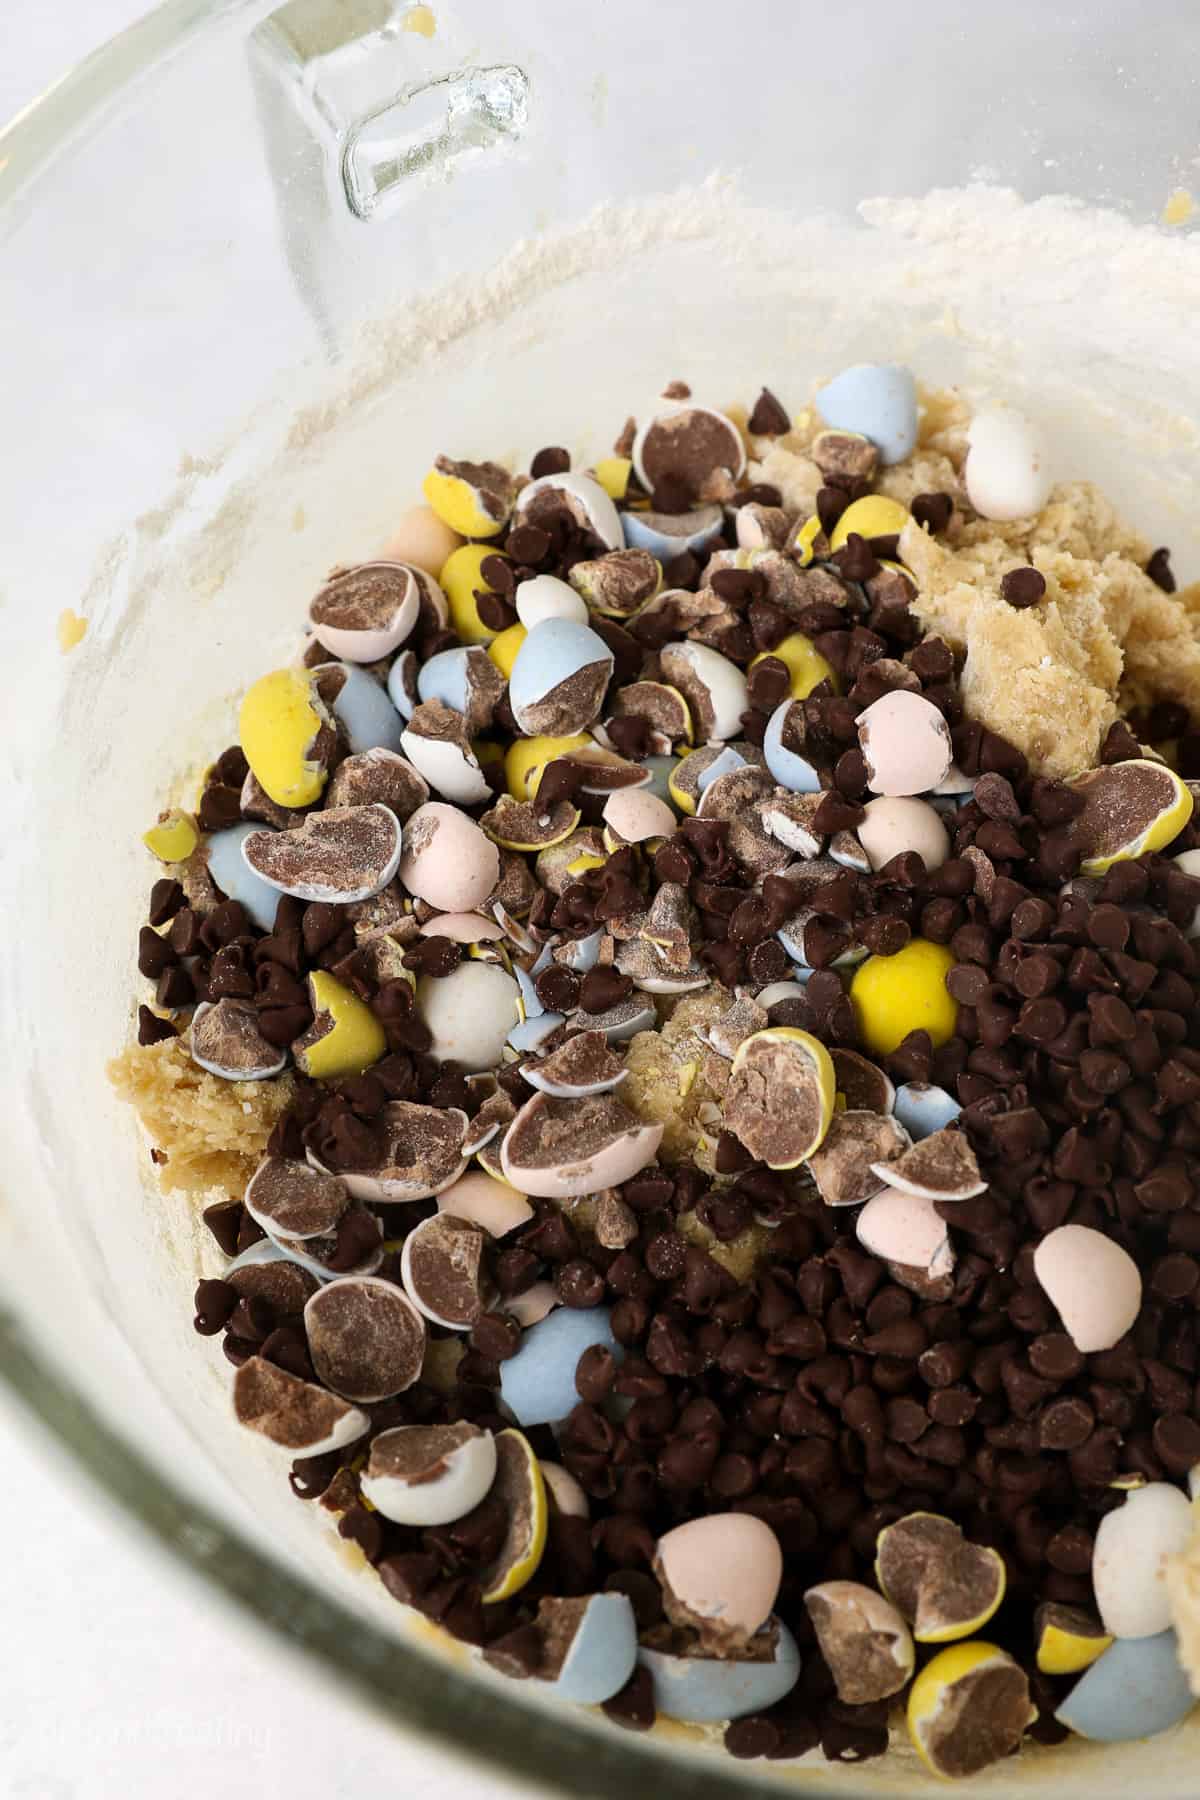 A close up of the inside of a glass mixing bowl showing mini chocolate chips and crushed Cadbury Mini Eggs